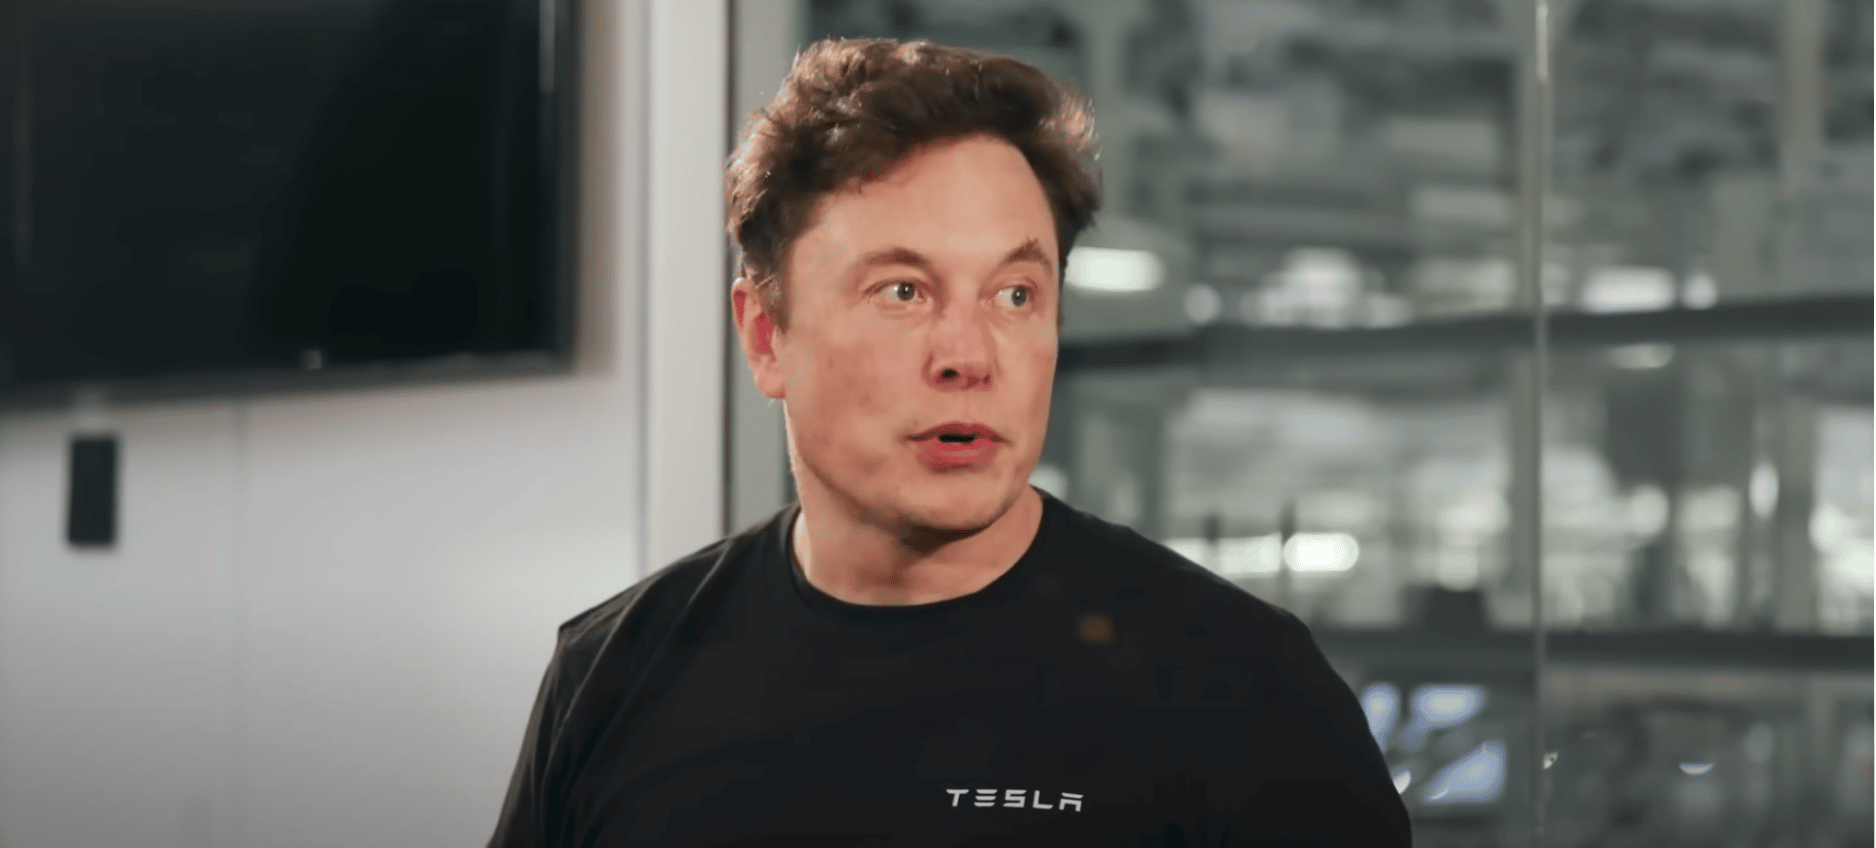 Elon Musk is ready to unveil his ‘Master Plan 3 ‘for humanity in less than 30 days